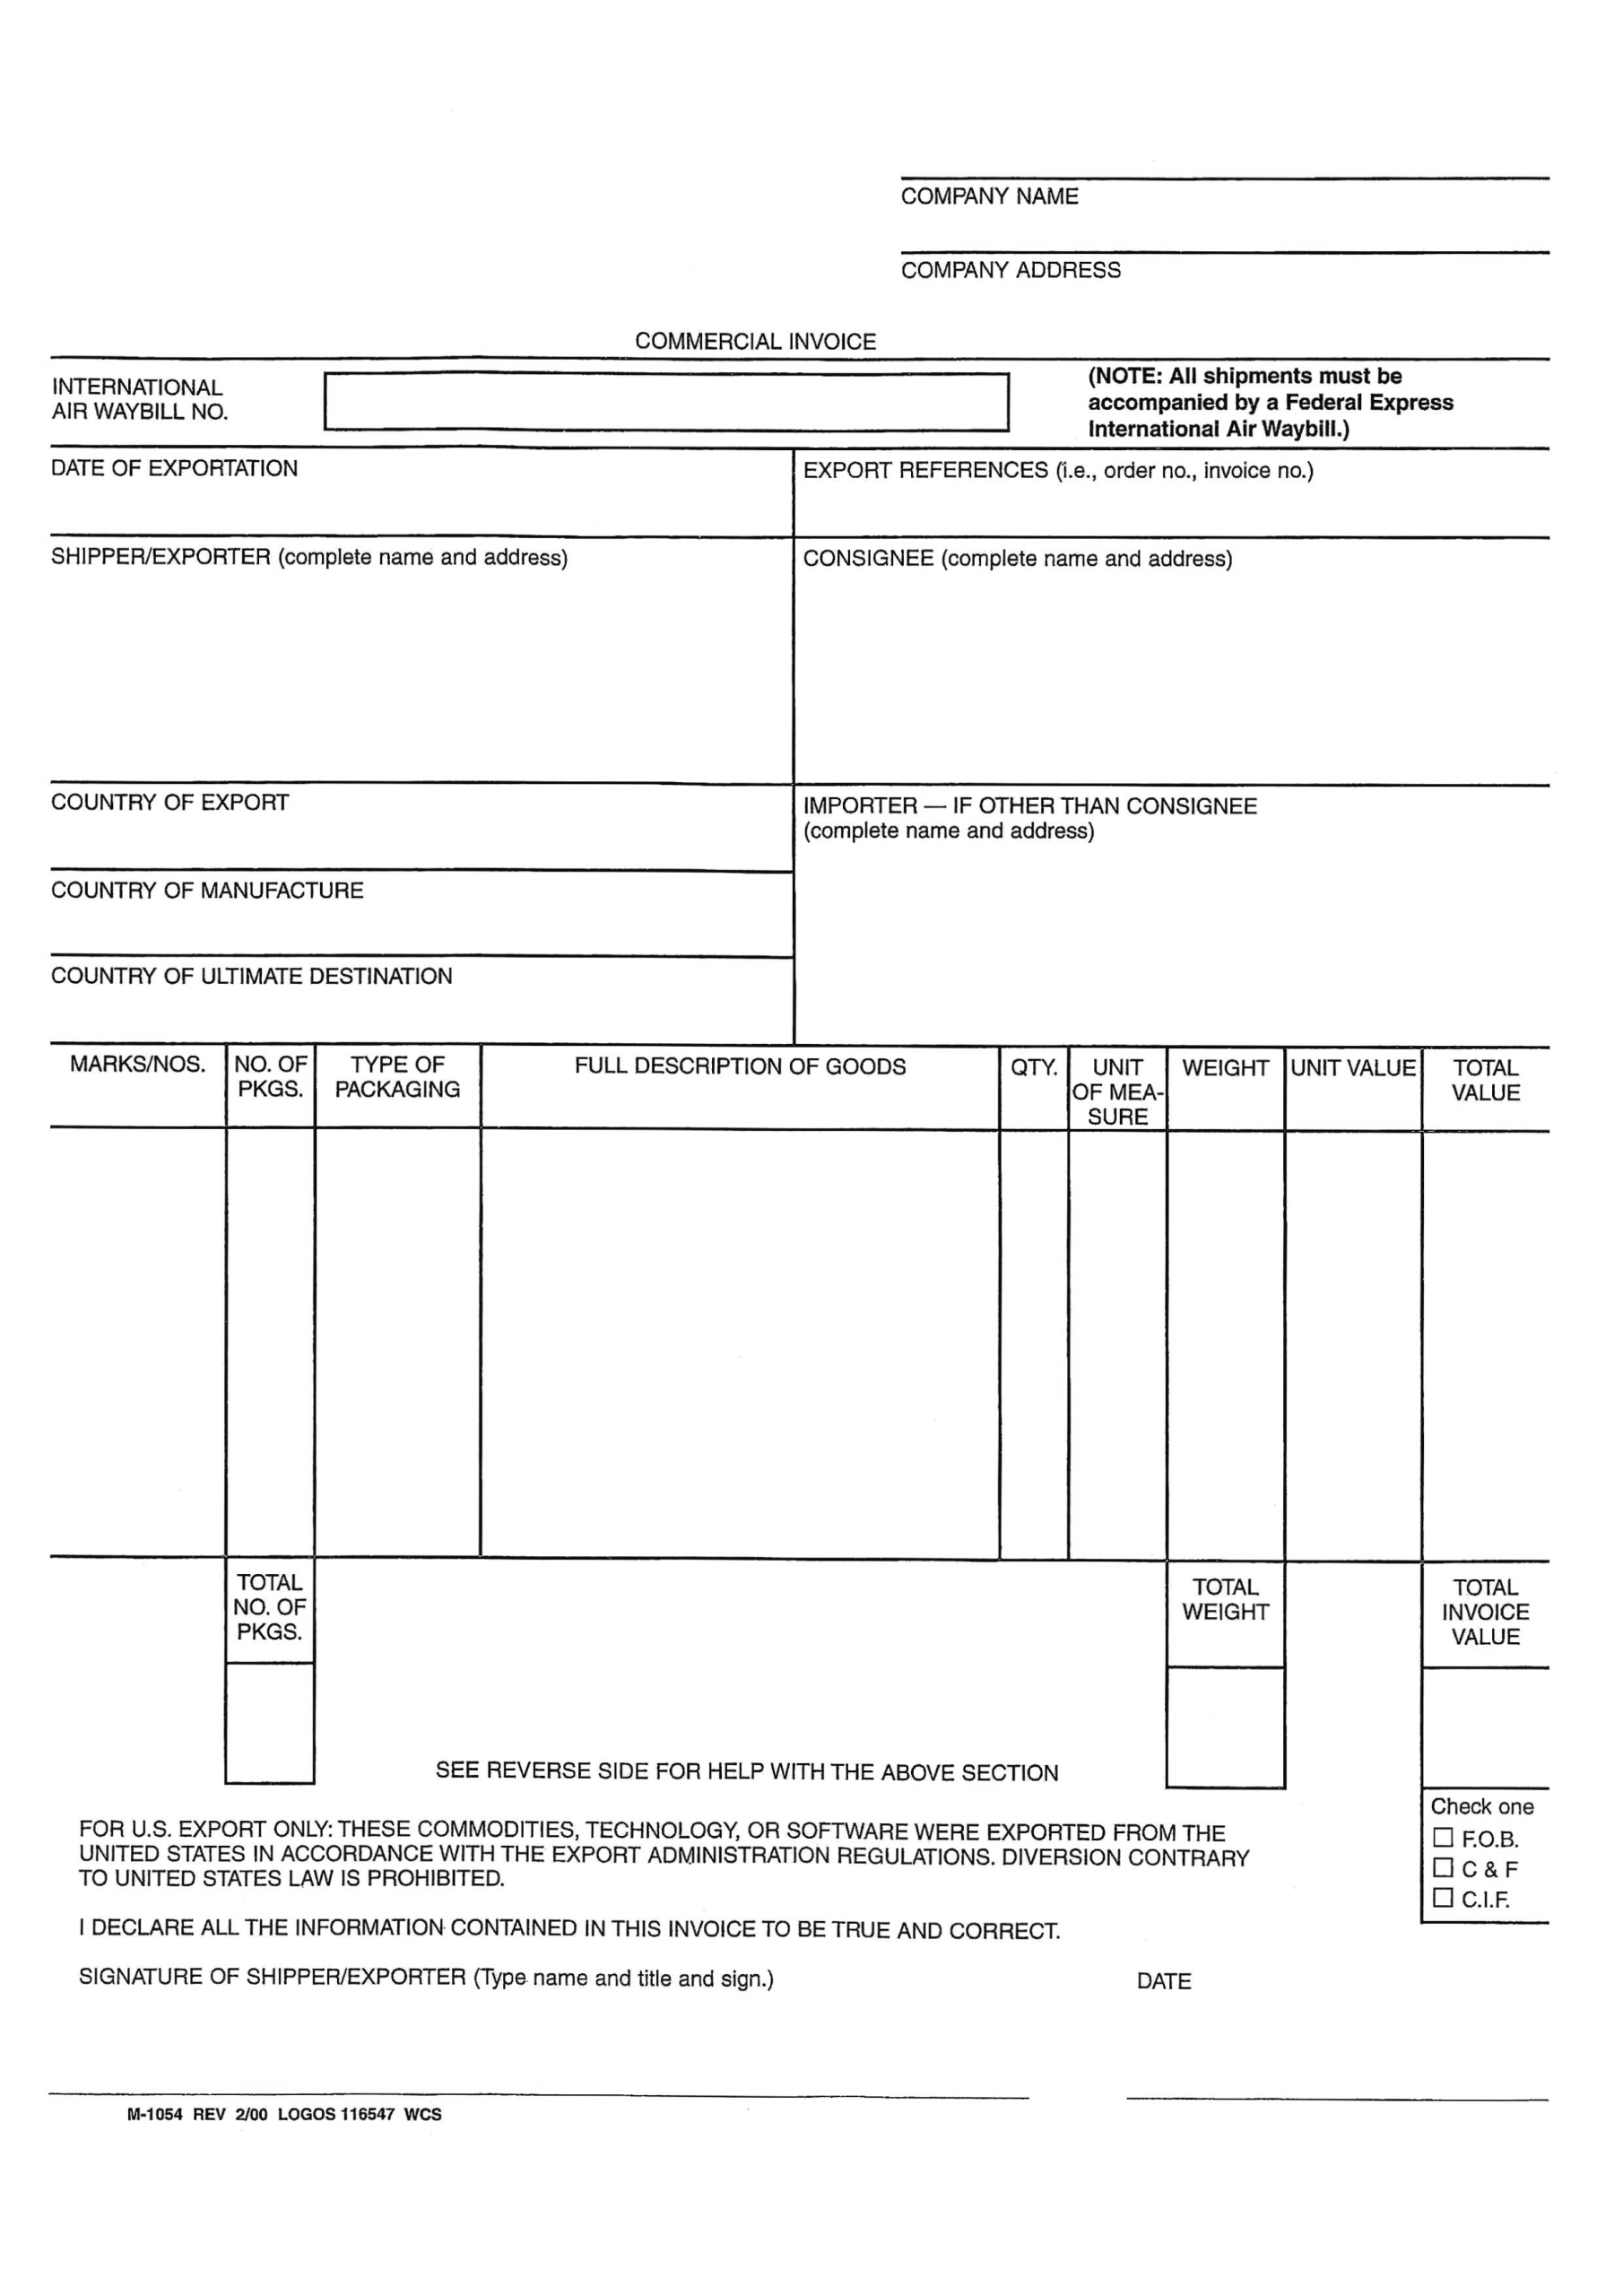 Blank Commercial Invoice Word | Templates At Allbusinesstemplates Intended For Template Of Invoice In Word